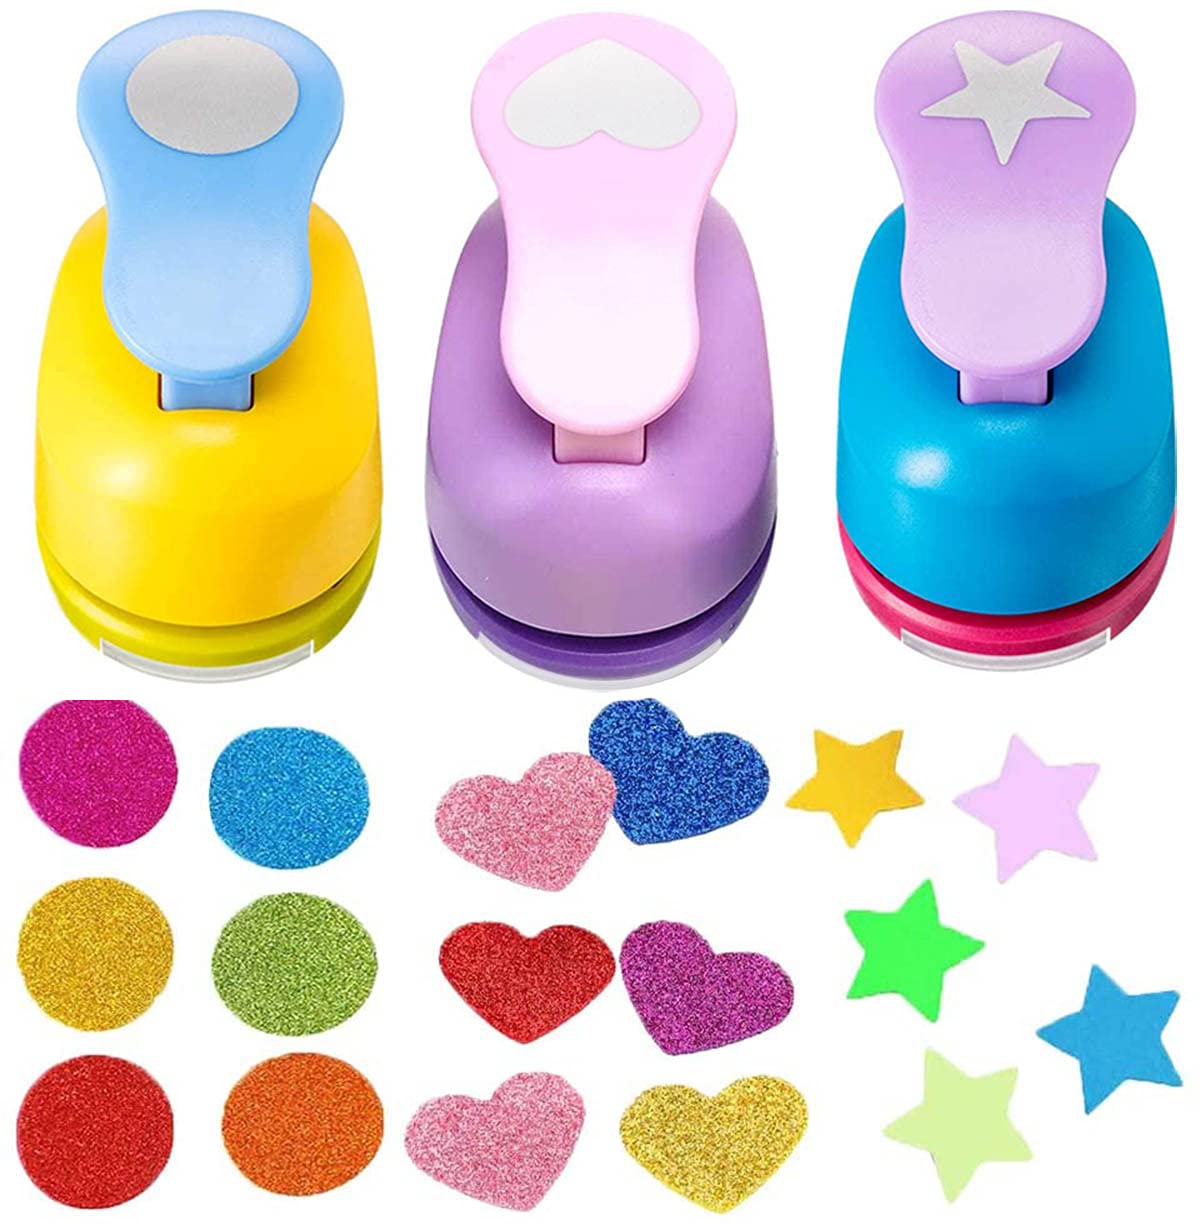  Star Paper Punch Hole Paper Puncher - 2 Inch Hole Paper  Punch Pink Star Hole Paper Punchers For Birthday Cardstock